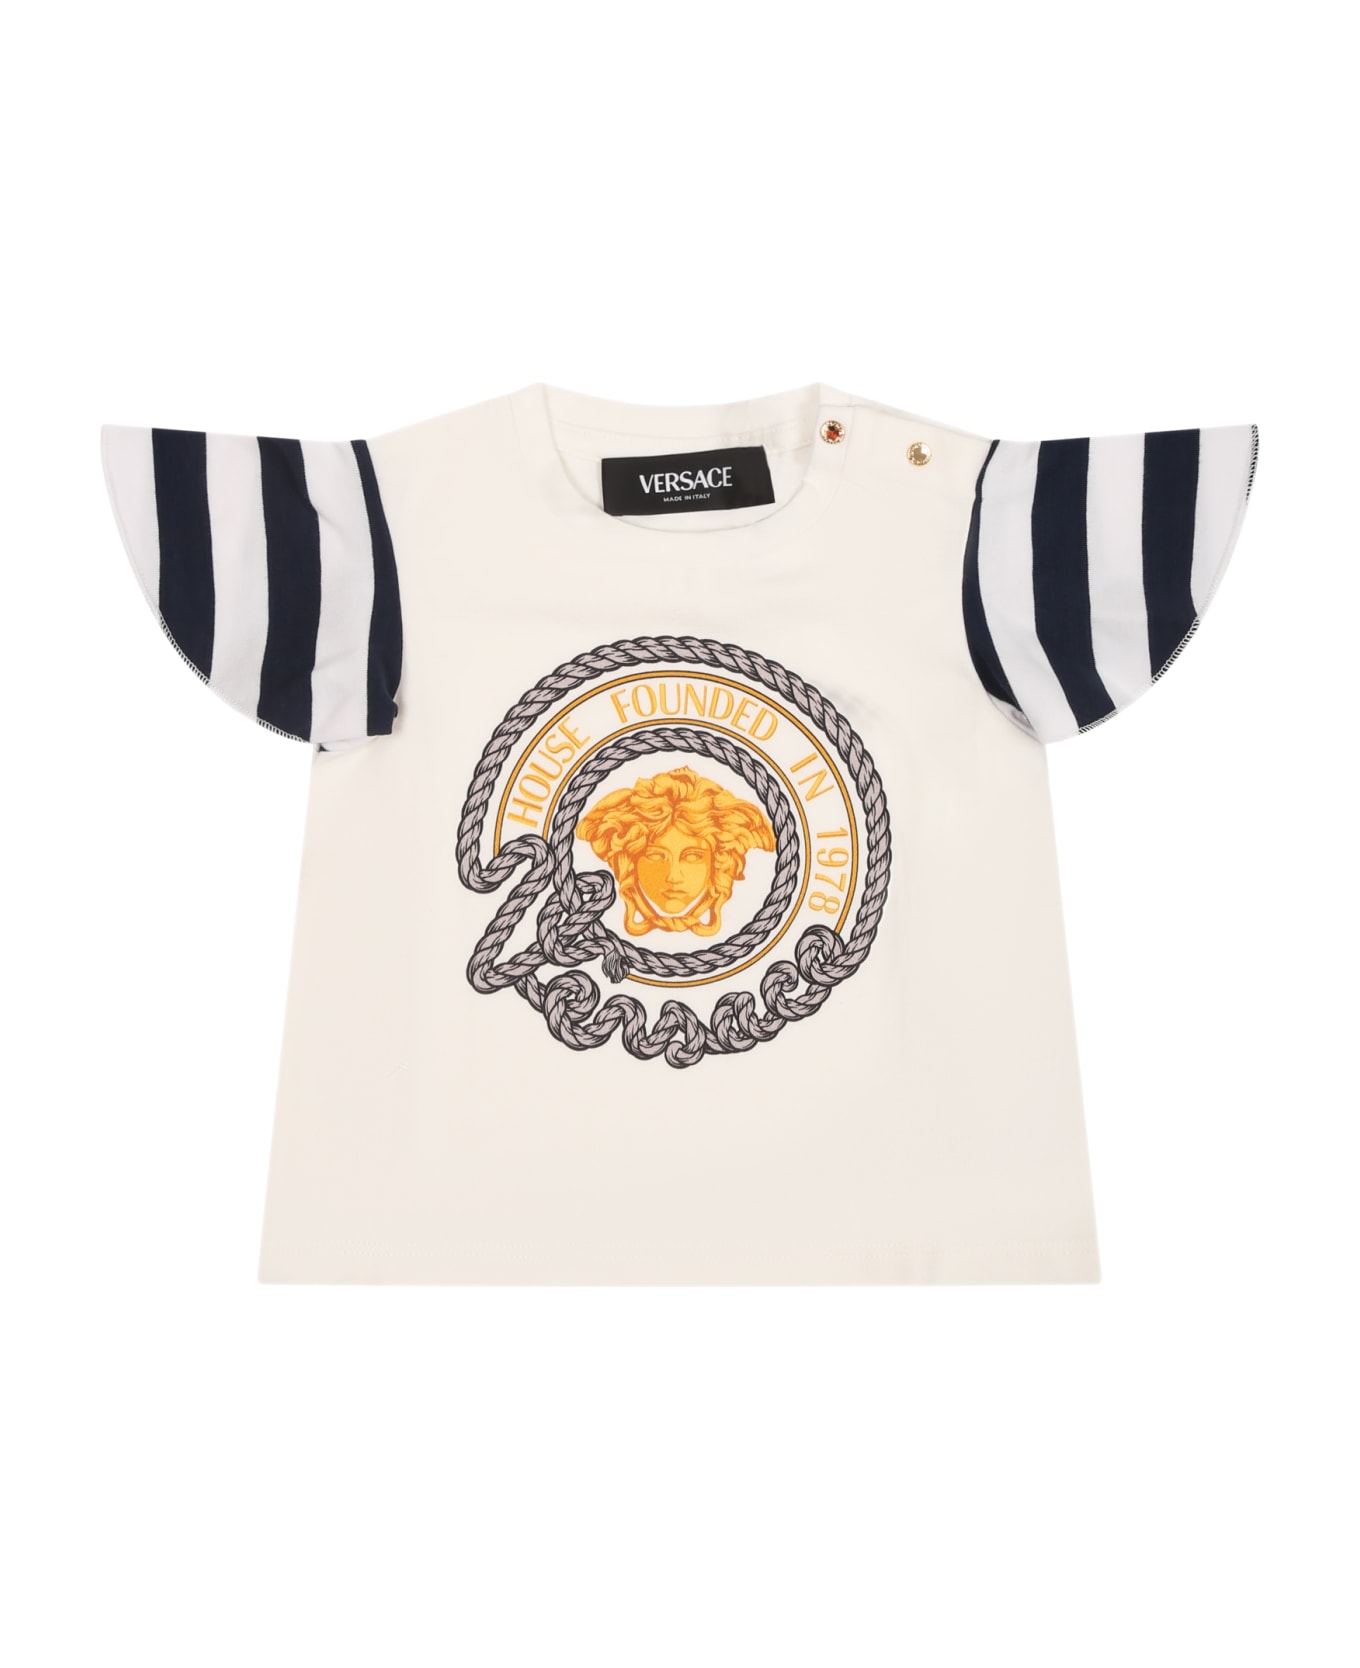 Versace White T-shirt For Baby Girl With Anchor Print - White